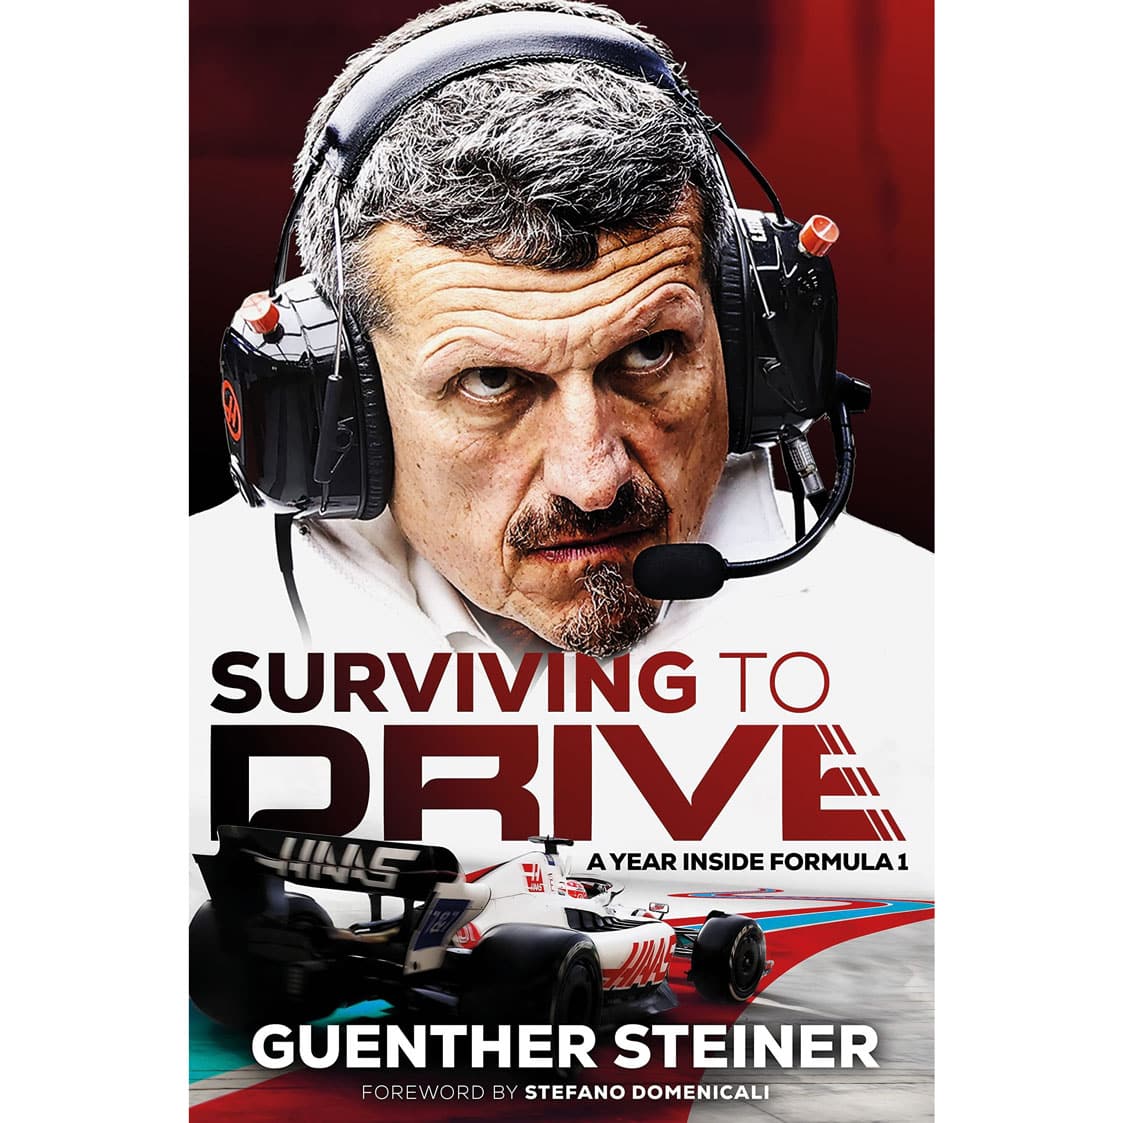 Surviving to drive book